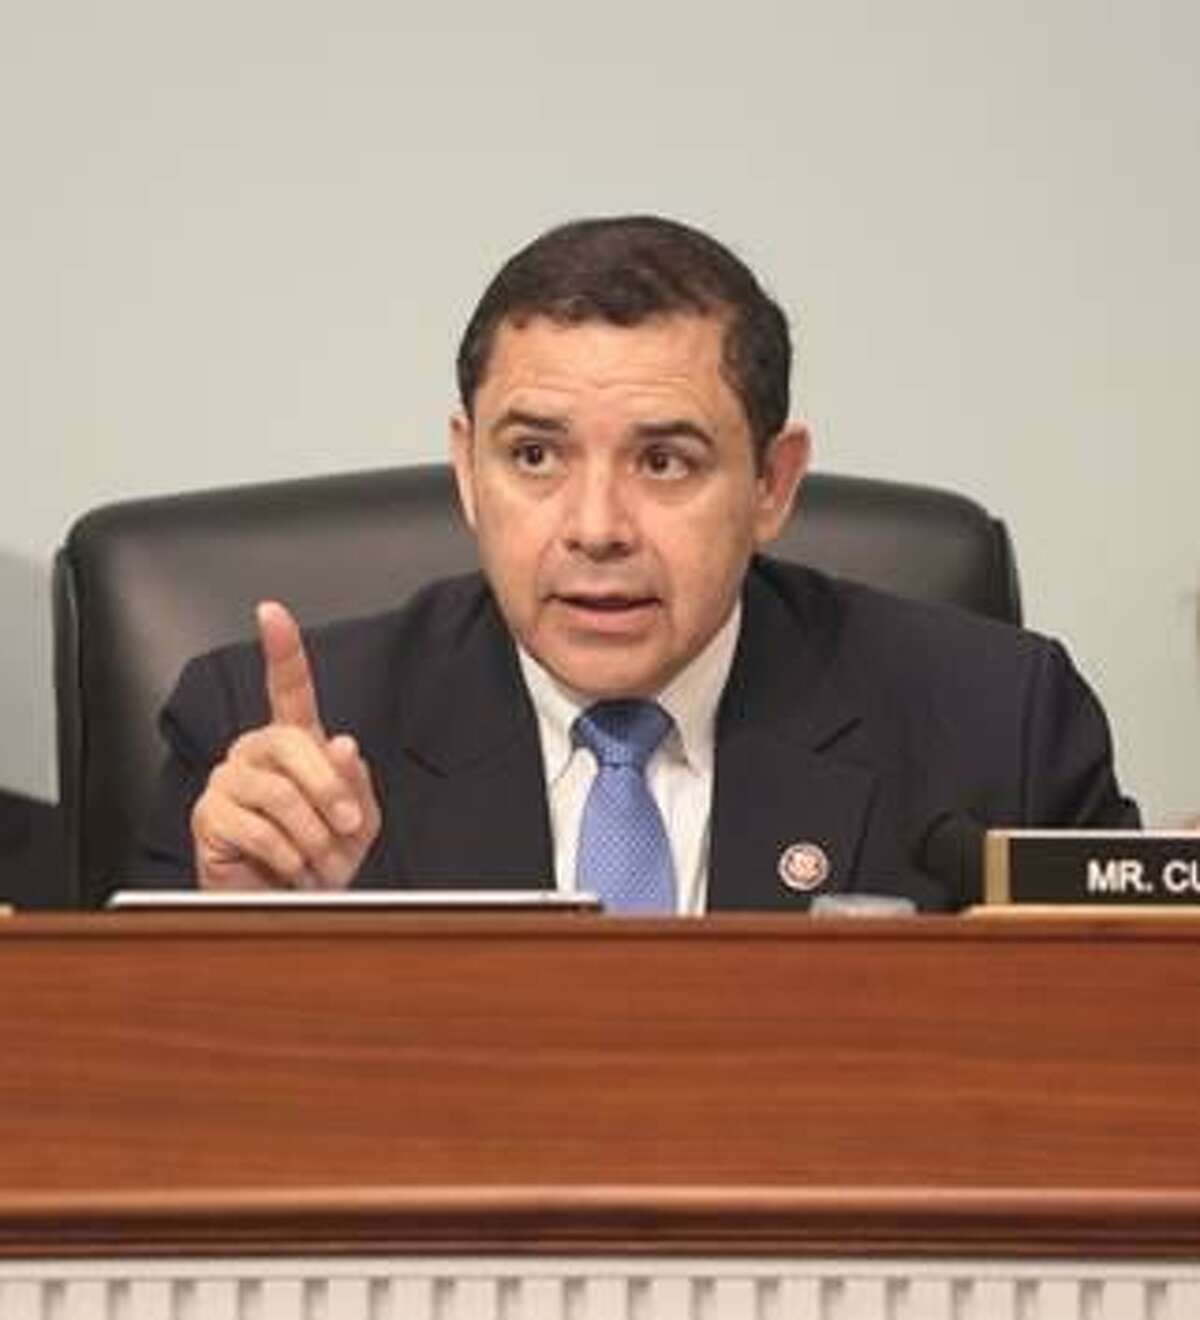 Rep. Henry Cuellar was reappointed to serve as chief deputy whip for the Democratic Party.